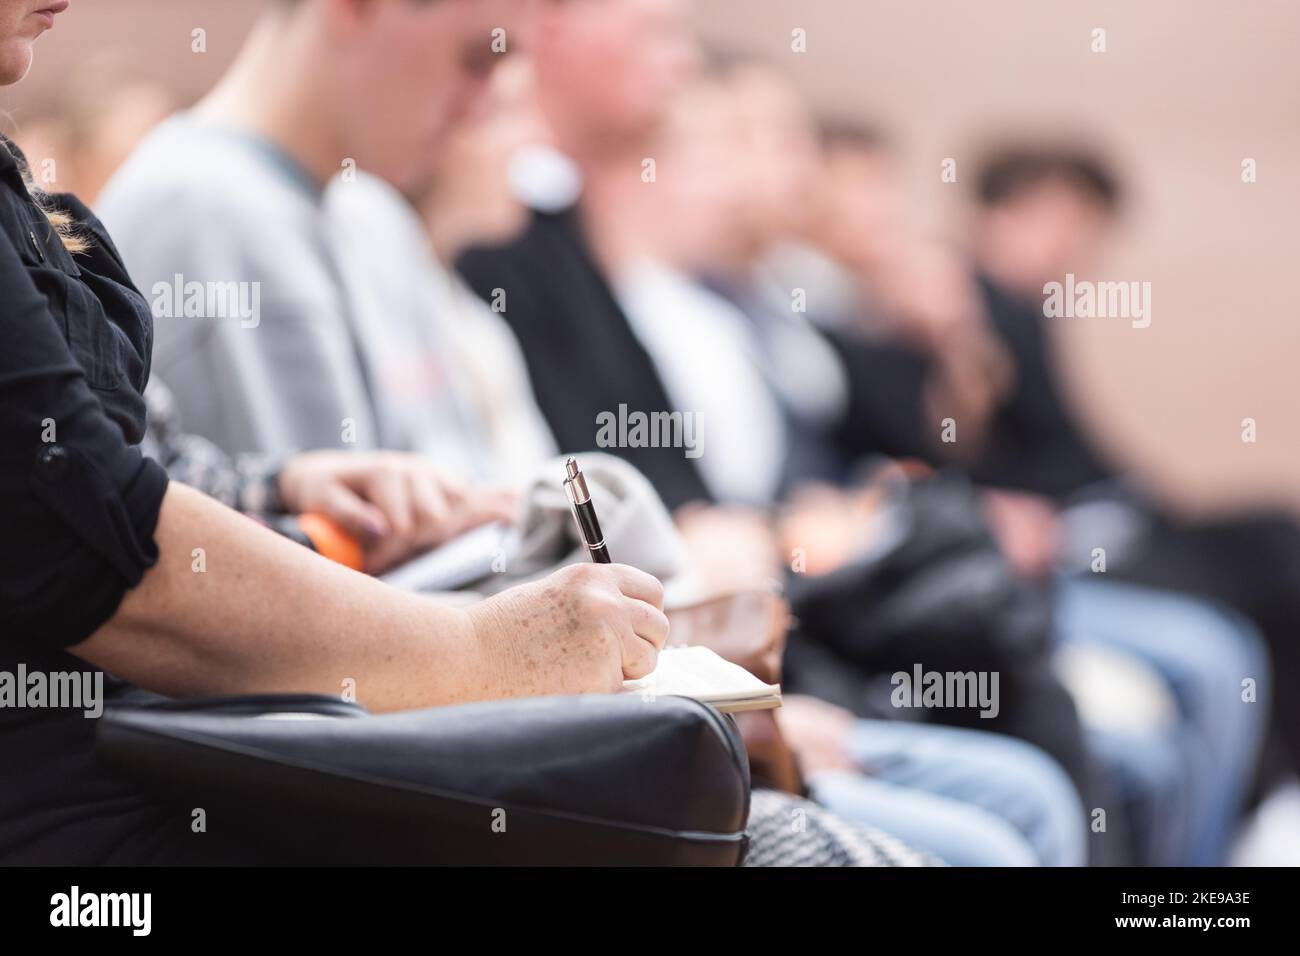 Female hands holding pen and notebook, making notes at conference lecture. Event participants in conference hall Stock Photo